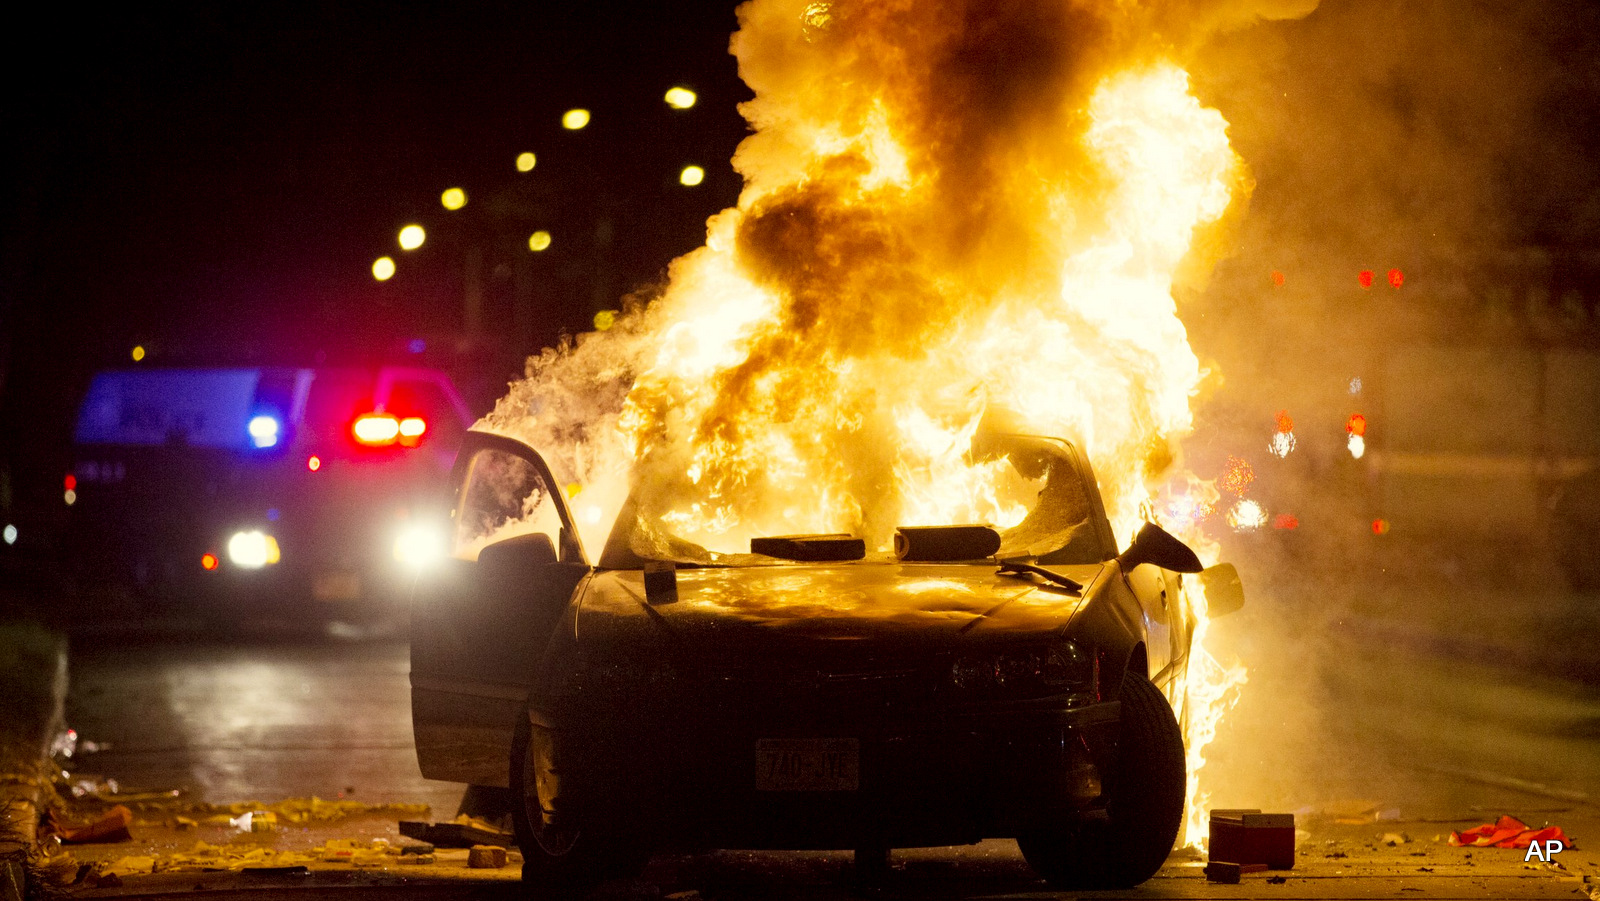 Fire in Milwaukee as protesters burned cars and set a gas station ablaze over the police shooting of a Black man in the city on Saturday Aug. 13, 2016.